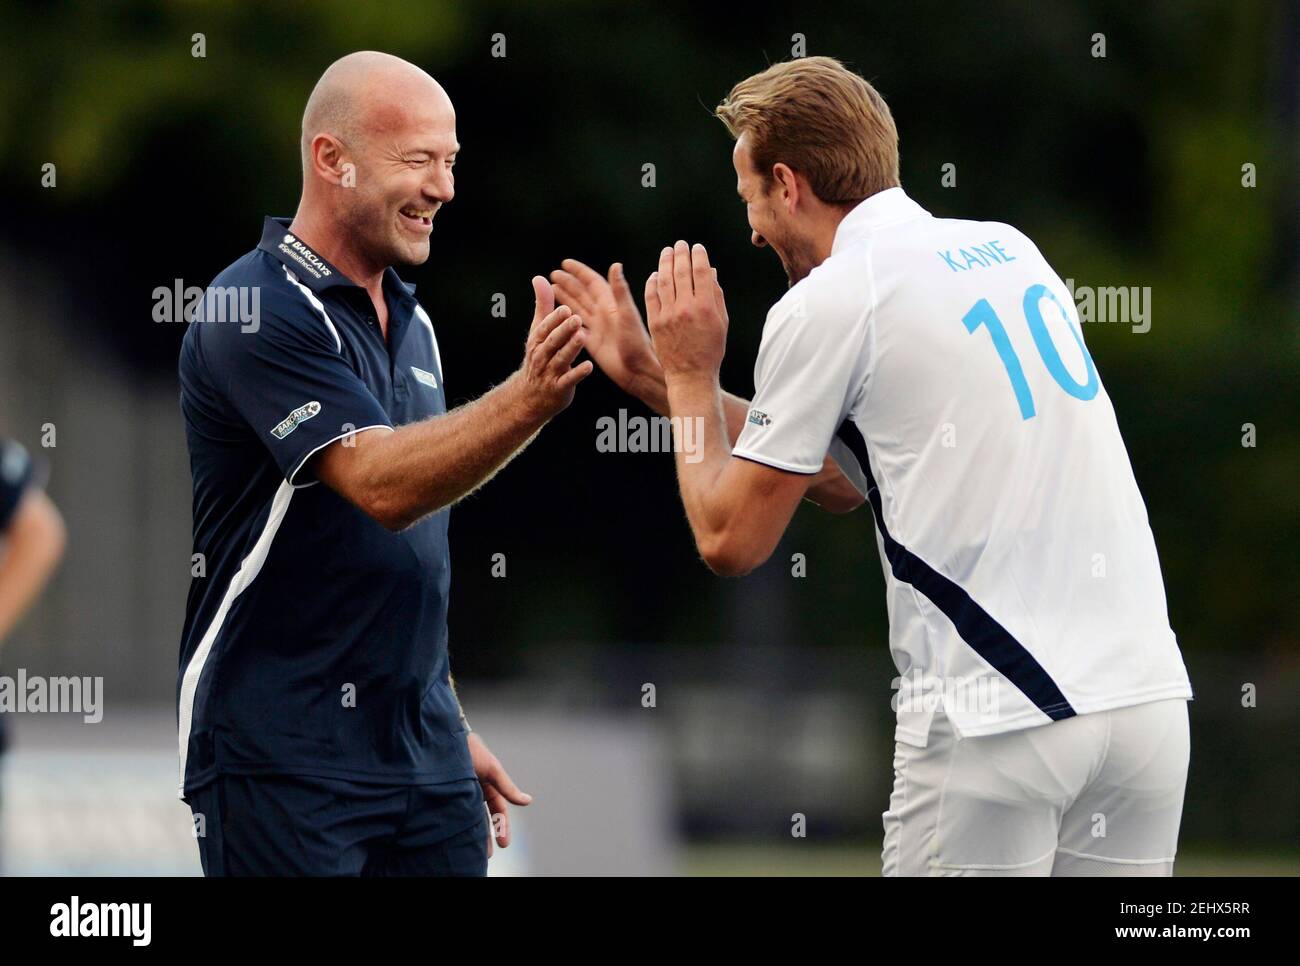 Football - Walking Football All Star Game - New River Sport & Fitness, White Hart Lane, Wood Green - 27/8/15 Alan Shearer and Harry Kane take part in an all-star walking football fixture staged by Barclays digital eagles to help community volunteer Steve rich promote the game nationwide Mandatory Credit: Action Images / Adam Holt Livepic EDITORIAL USE ONLY. Stock Photo